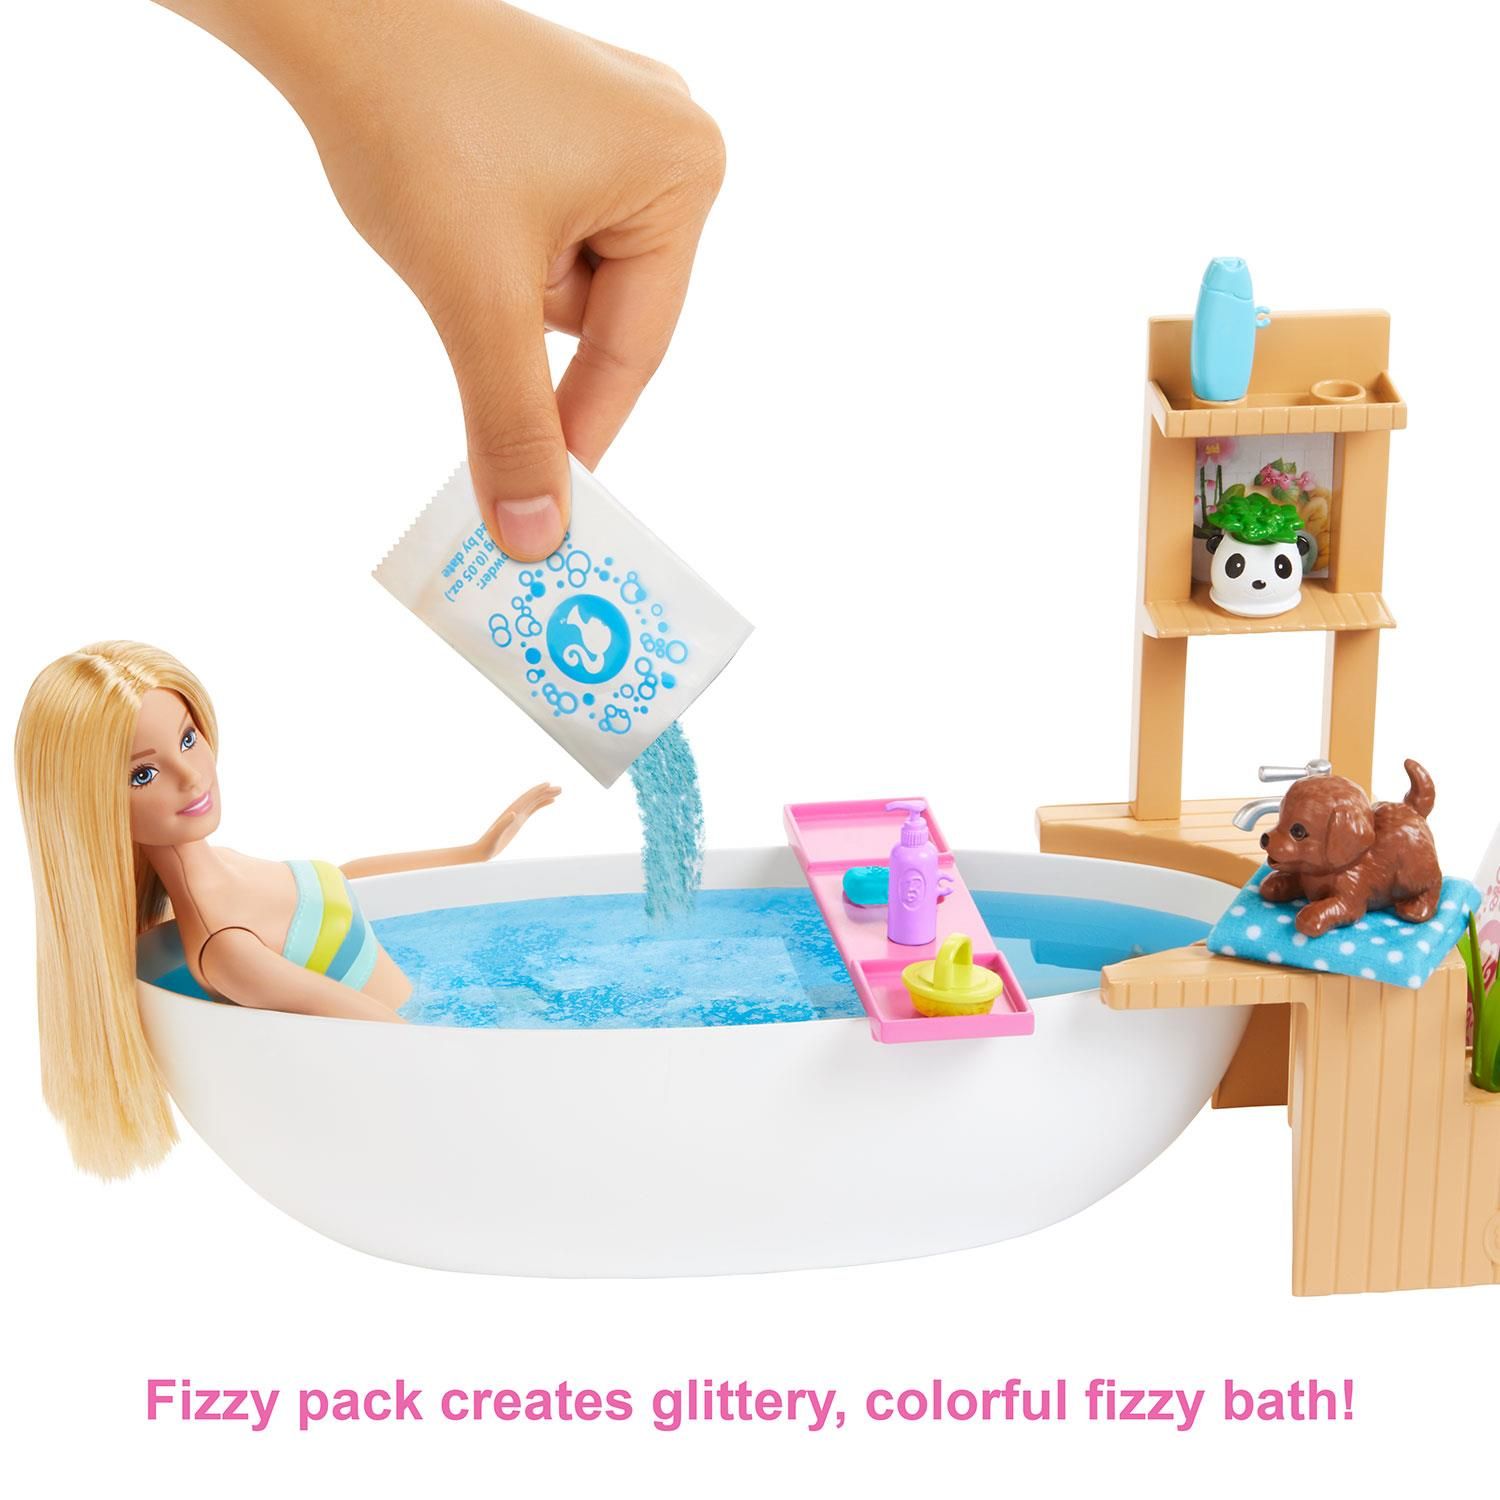 Barbie Fizzy Bath Doll & Playset, Blonde with Tub, Fizzy Powder, Puppy & More

Barbie doll knows the way to be one best is to give yourself the best care This spa-themed playset celebrates one of her favourite ways to recharge: a fizzing bath. It comes with a Barbie doll, a puppy, a spa tub, and accessories to play out a real fizzy bath. Simply fill the tub with water, place the Barbie doll inside and add one of the five included glittery fizz packs to see the water bubble, just like in a real spa Barbie doll can relax with accessories that include a tub tray, bath products, a loofah, a back brush, and a towel. The spa is calming, too, with a wood-inspired frame complete with a panda planter. There's lots of space for puppies to sit, plus spots to store the accessories. Some pieces have a handle the doll can hold to encourage easy role-play fun. The Barbie doll wears a swimsuit with a wrap-around towel and features extra flexibility for realistic posing and active play.

Features:

Kids can practice self-care as they help Barbie doll recharge with this spa-themed playset that lets them play out a classic moment -- a glittery, fizzy bath.
​The set includes a Barbie doll wearing a swimsuit, her puppy, a bathtub, a spa frame, 5 packs of fizzy powder and accessories to help play out a relaxing bath.
​To start the spa-like action, fill the tub with water, place the doll inside and add one of the glittery fizz packs -- the water will change colour, bubble, and foam for a life-like experience.
​Bath accessories expand the storytelling opportunities -- handles on some of the pieces make it easier for kids to role-play; place the products and brushes on the bath tray or store them on the spa frame.
​The wood-inspired frame has a plug-and-play design to hold accessories in place for active play and easy cleanup; plants add realistic calming touches.

Package Includes: Barbie Fizzy Bath Doll & Playset